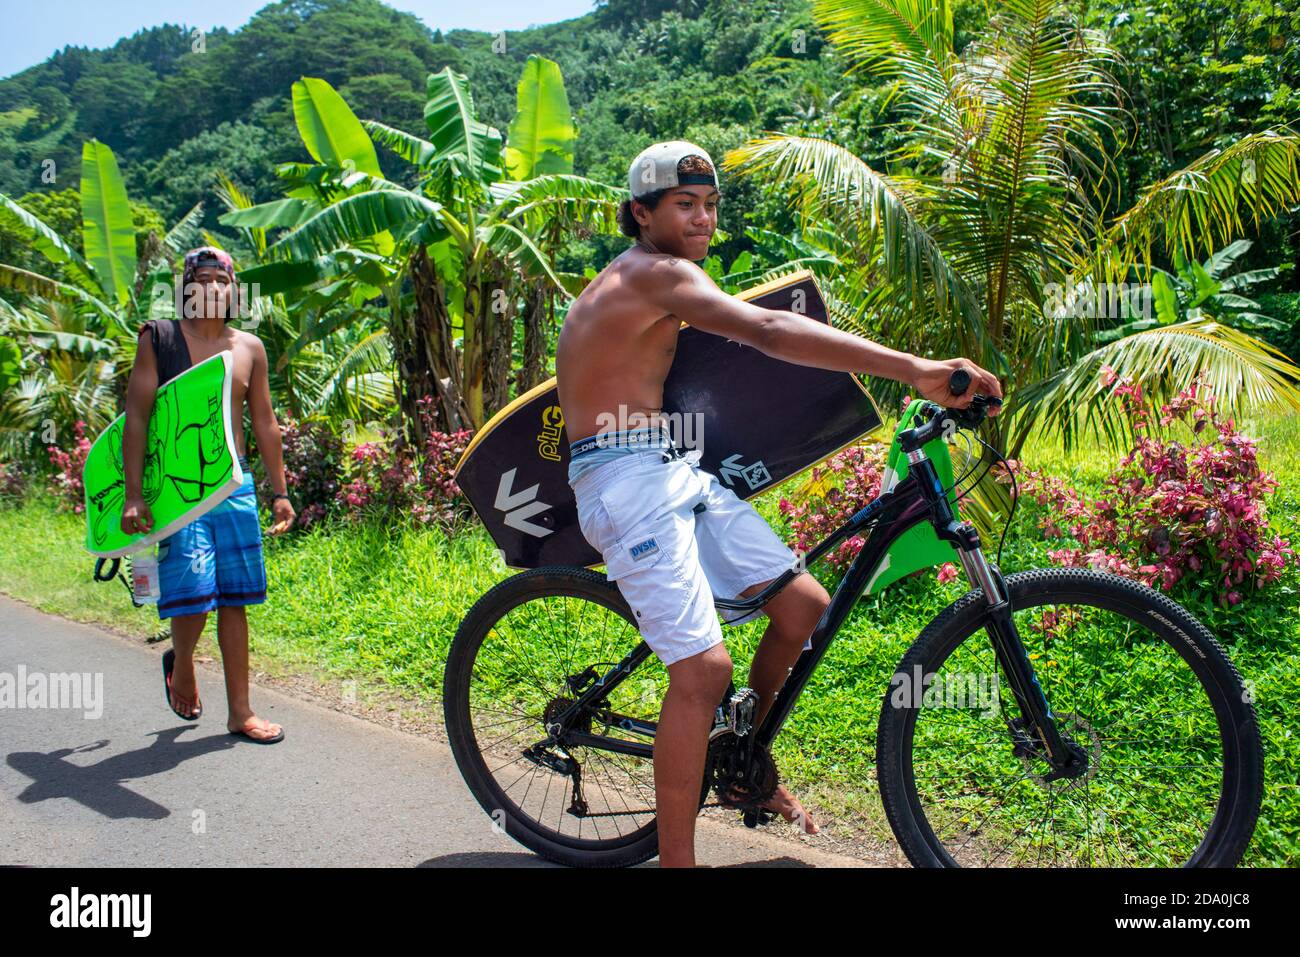 Palm trees and teen boys cyclists at Route de ceinture, Tahiti Nui, Society Islands, French Polynesia, South Pacific. Stock Photo